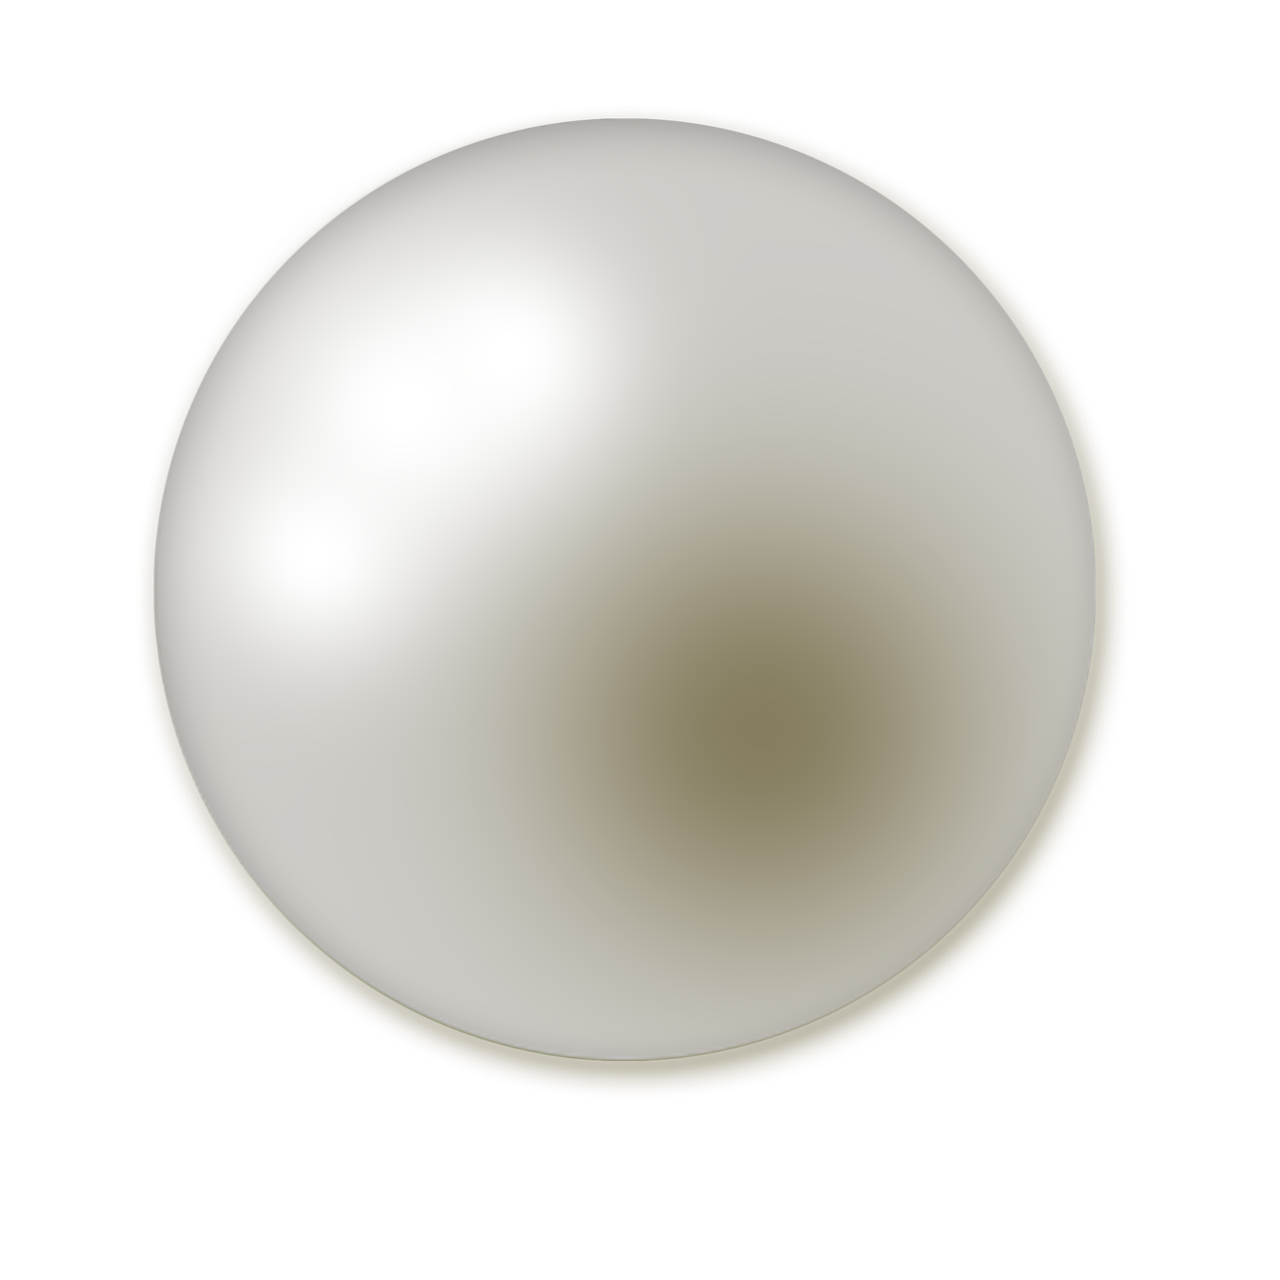 a shiny white ball on a black background, flickr, digital art, real pearls, soft oval face, no gradients, watch photo